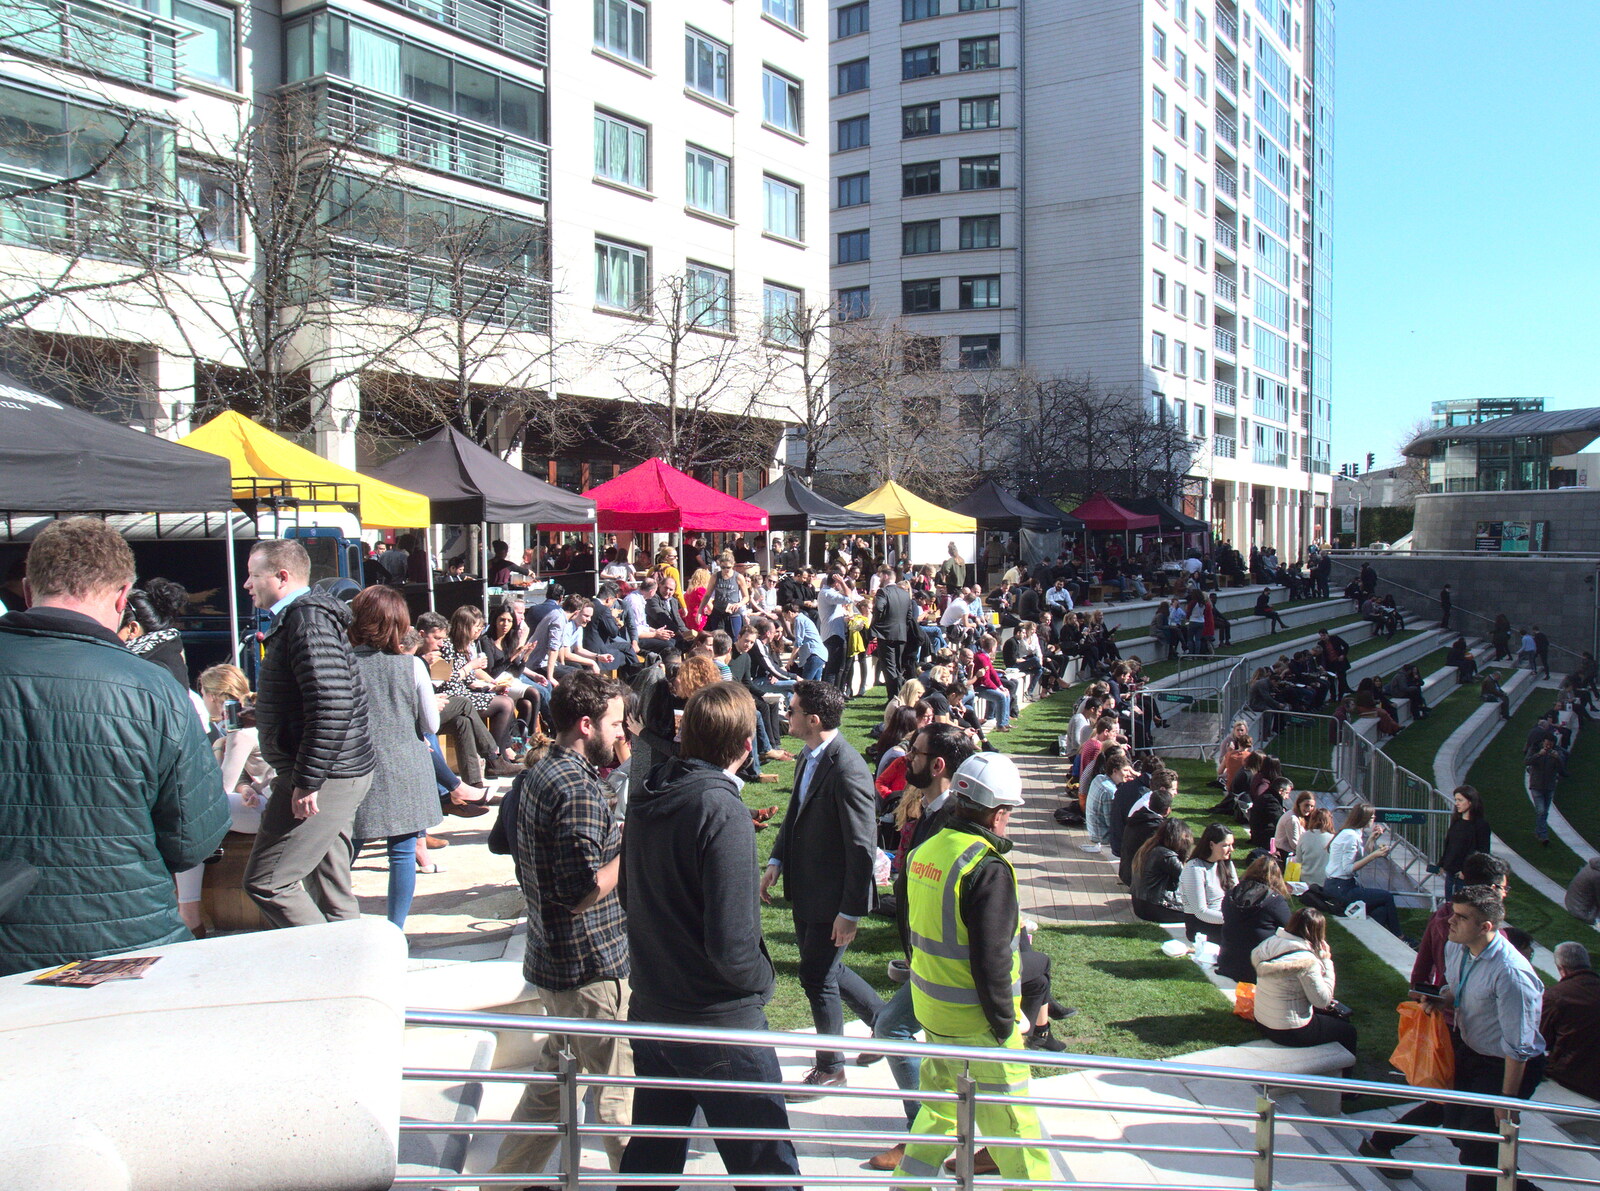 Food stalls and people are out in Sheldon Square from Digger Action and other March Miscellany, Suffolk and London - 21st March 2017